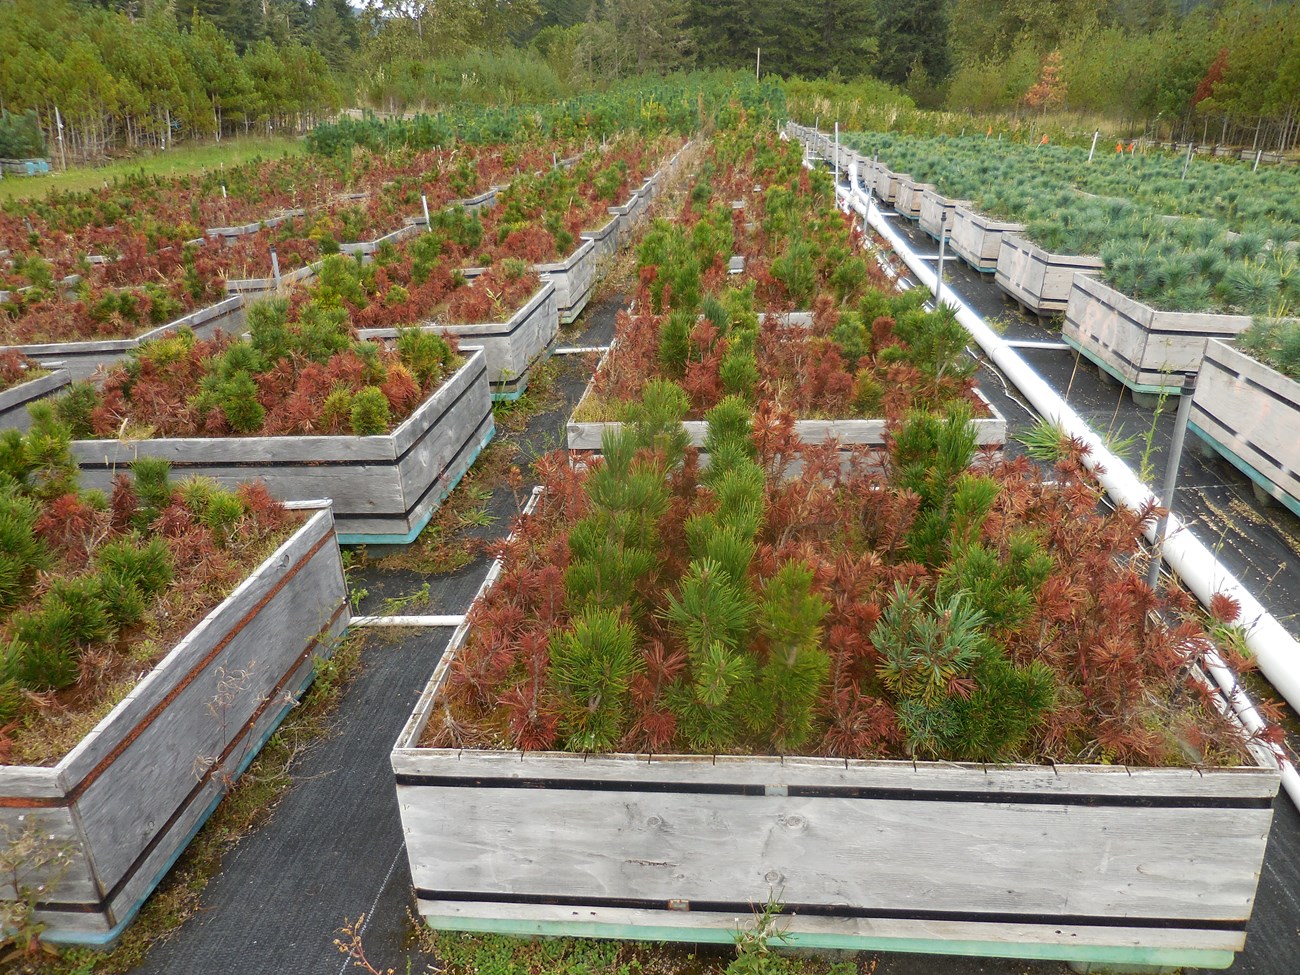 Row of boxes, each containing a mix of green and brown pine seedlings